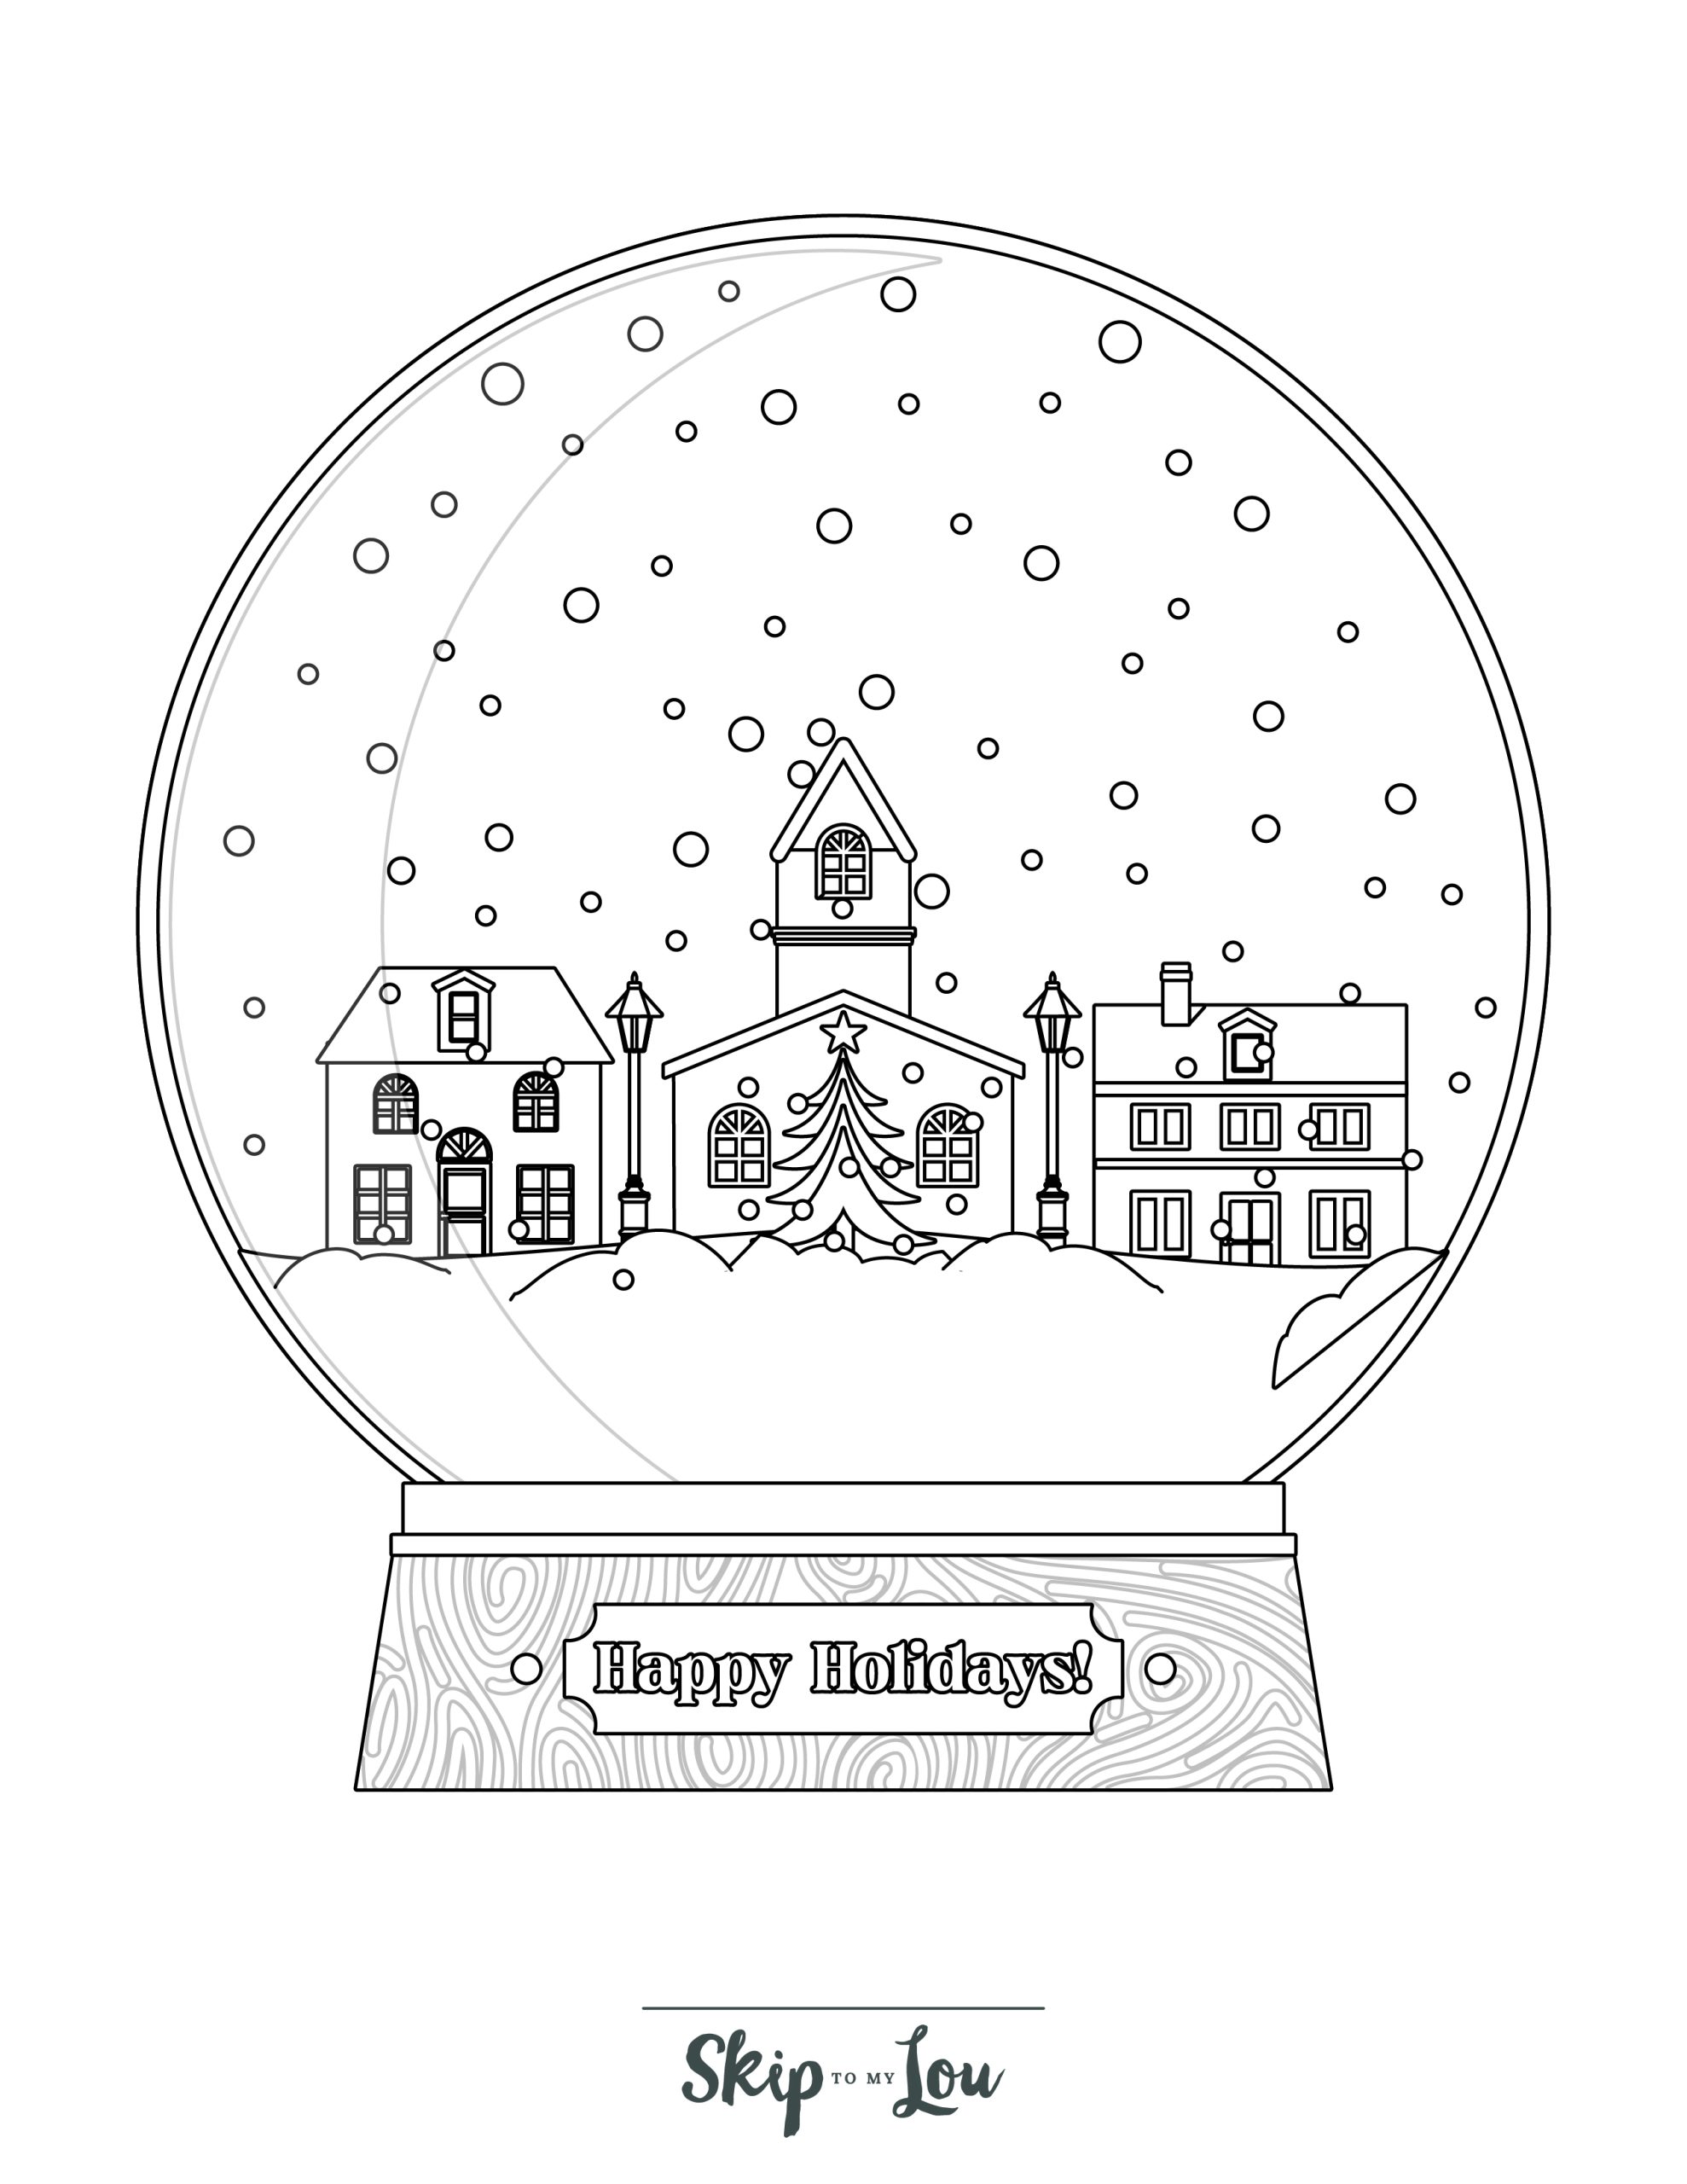 Holiday Coloring Page 5 - Line drawing of a snow globe with a town scene